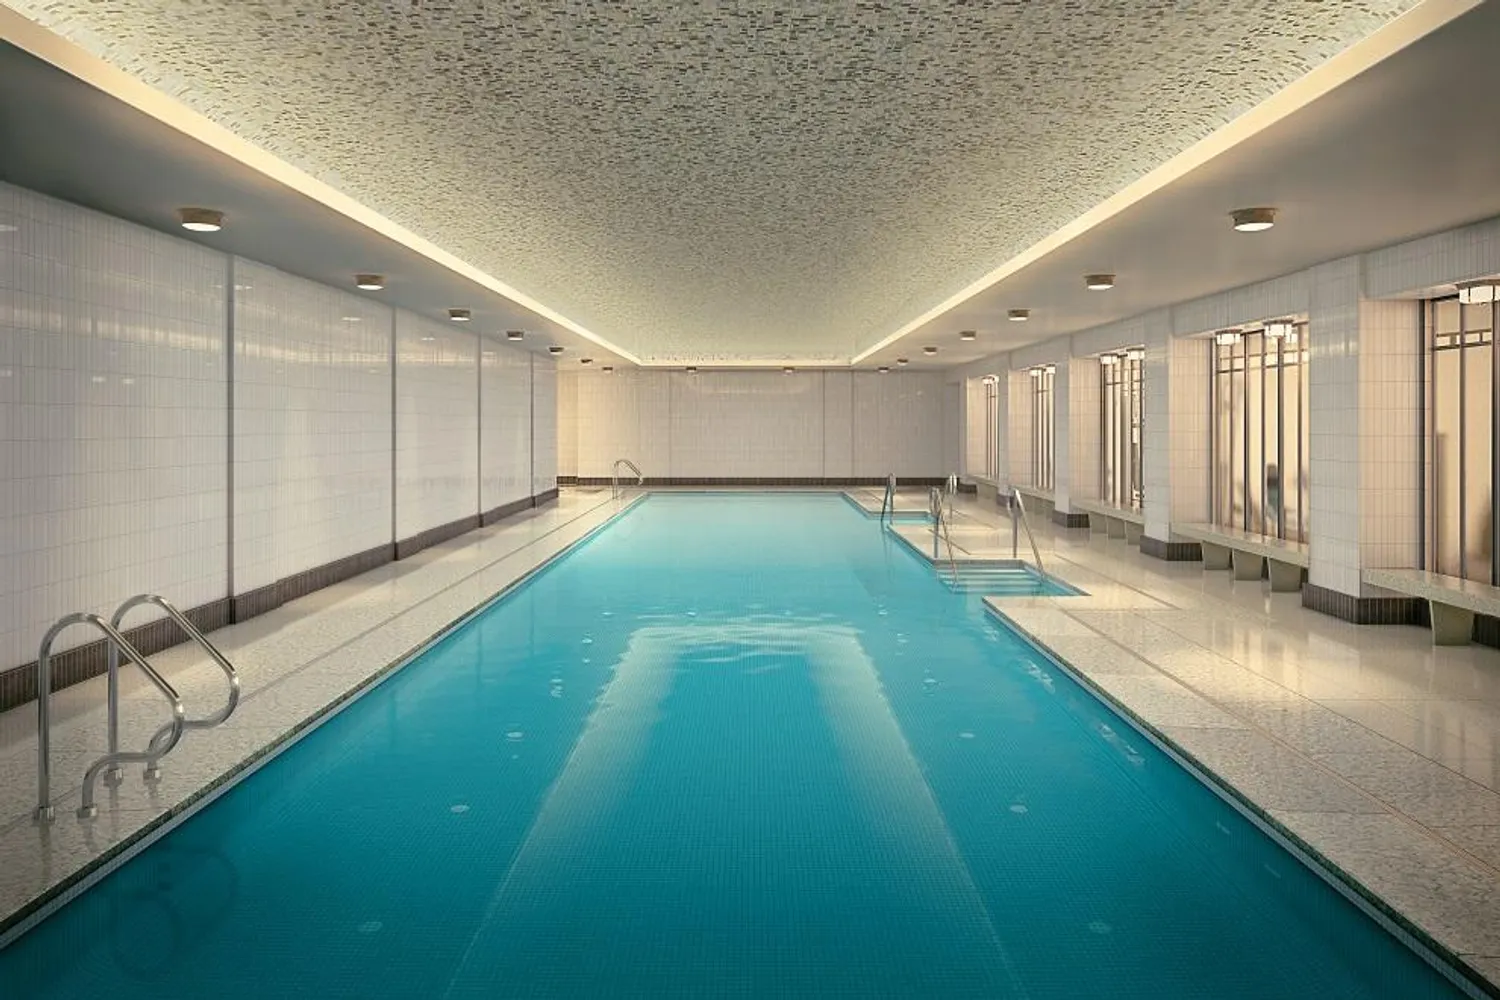 25-meter swimming pool with Jacuzzi